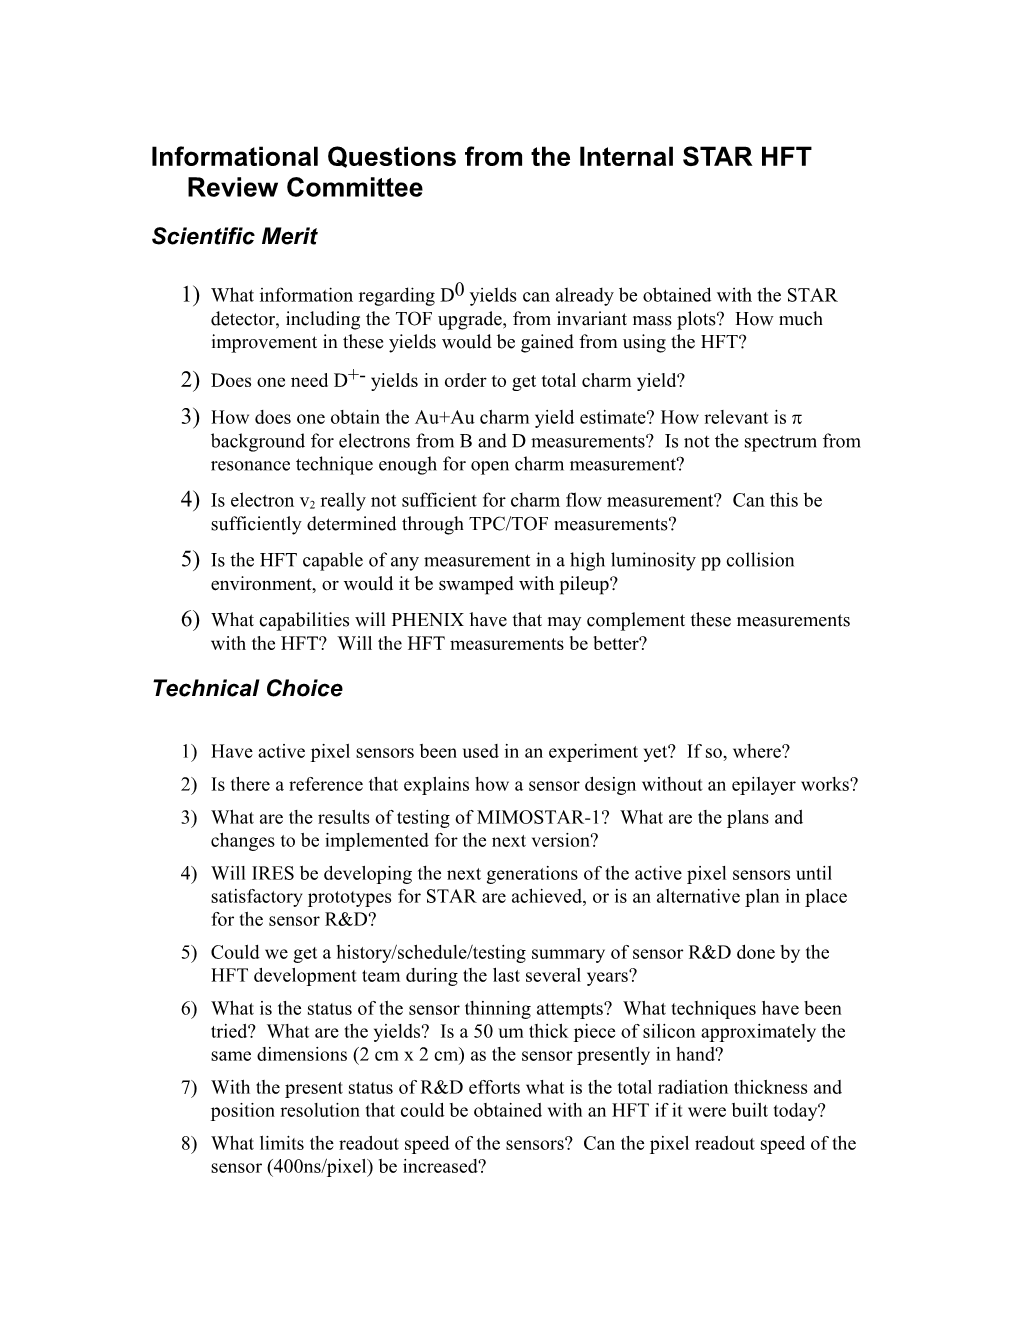 Informational Questions from the Internal STAR HFT Review Committee